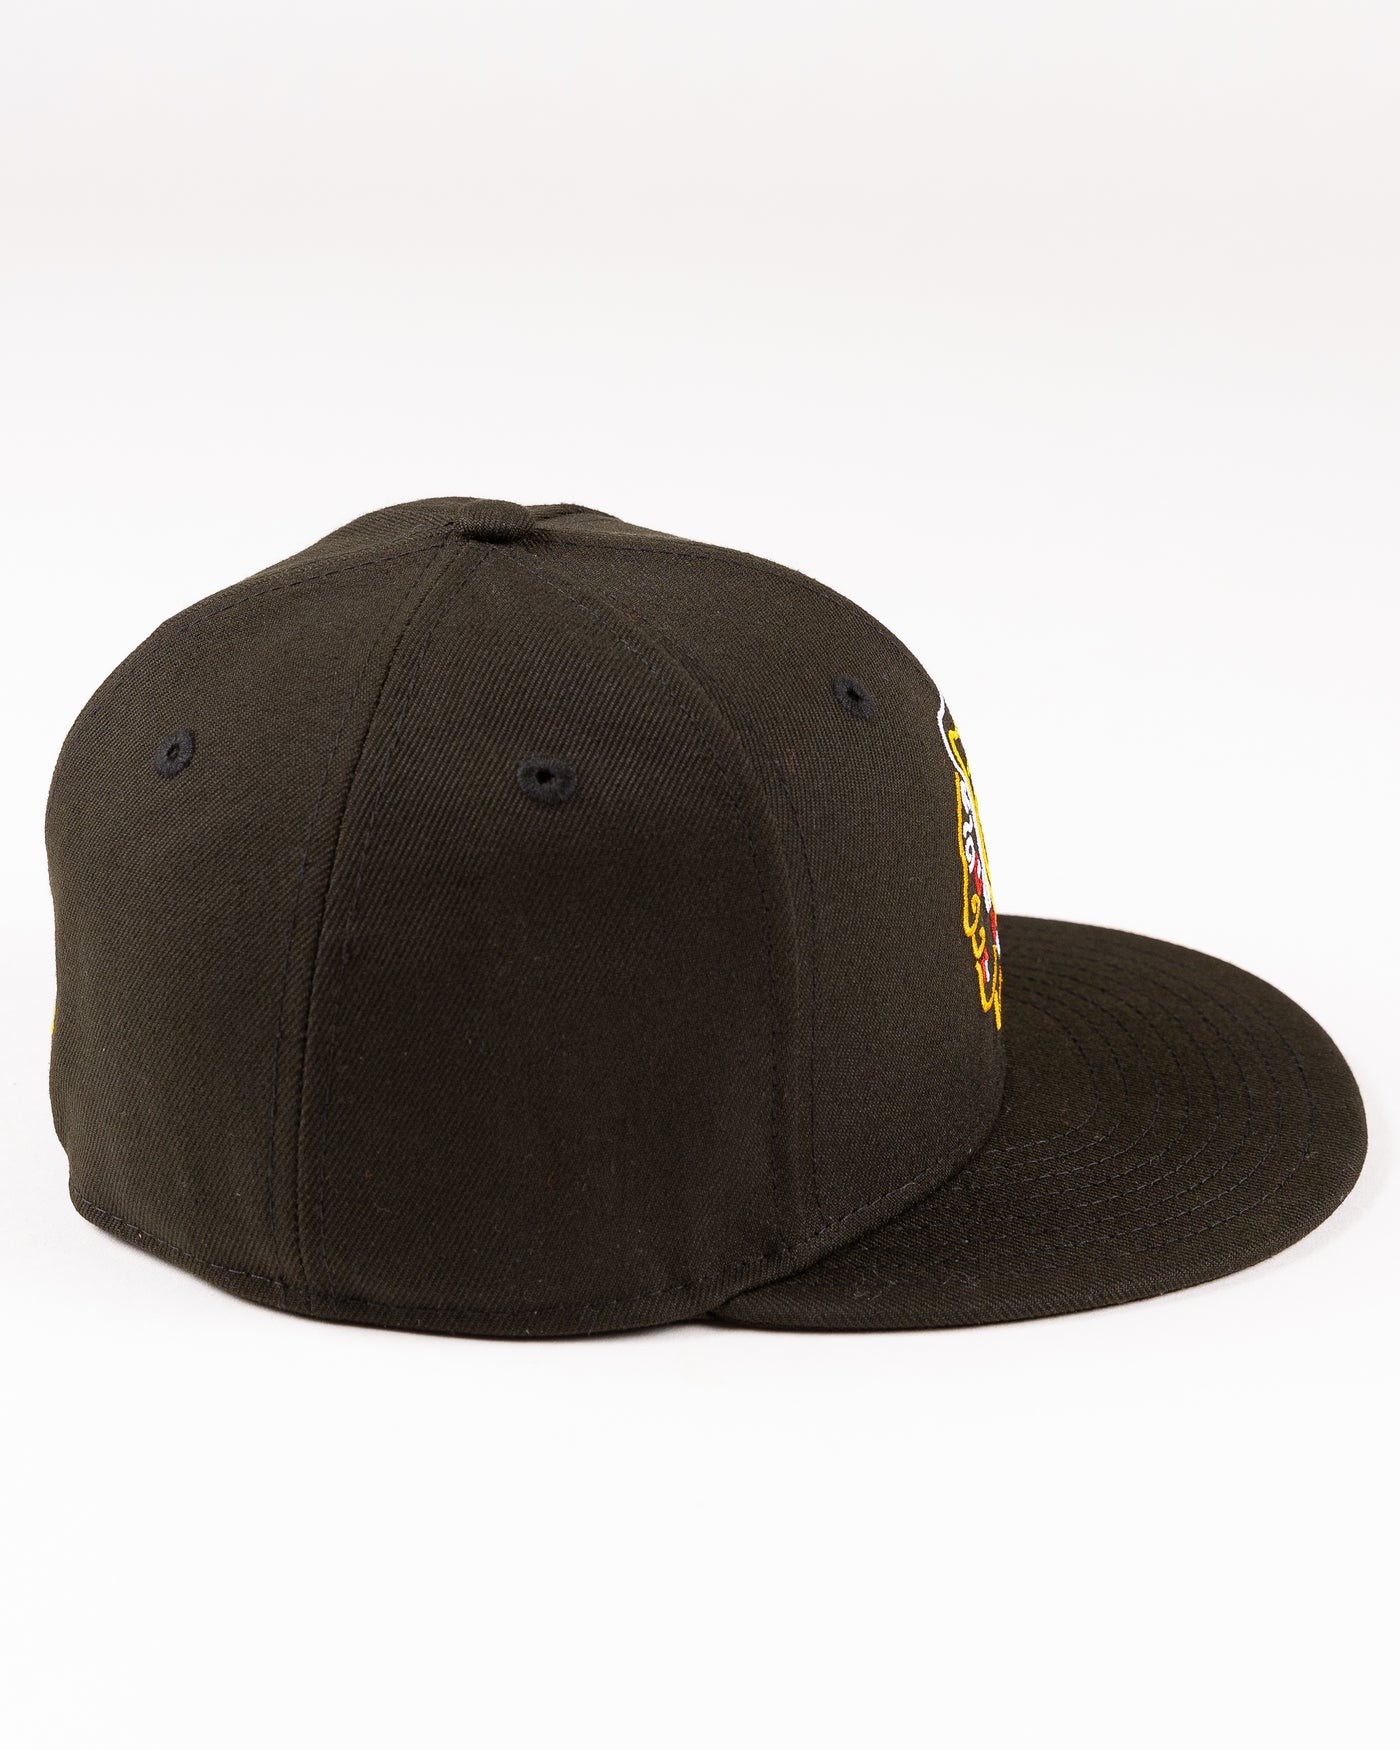 black New Era fitted cap with Chicago Blackhaks primary logo embroidered in front and secondary logo embroidered on back in neon lights colorway - right side lay flat